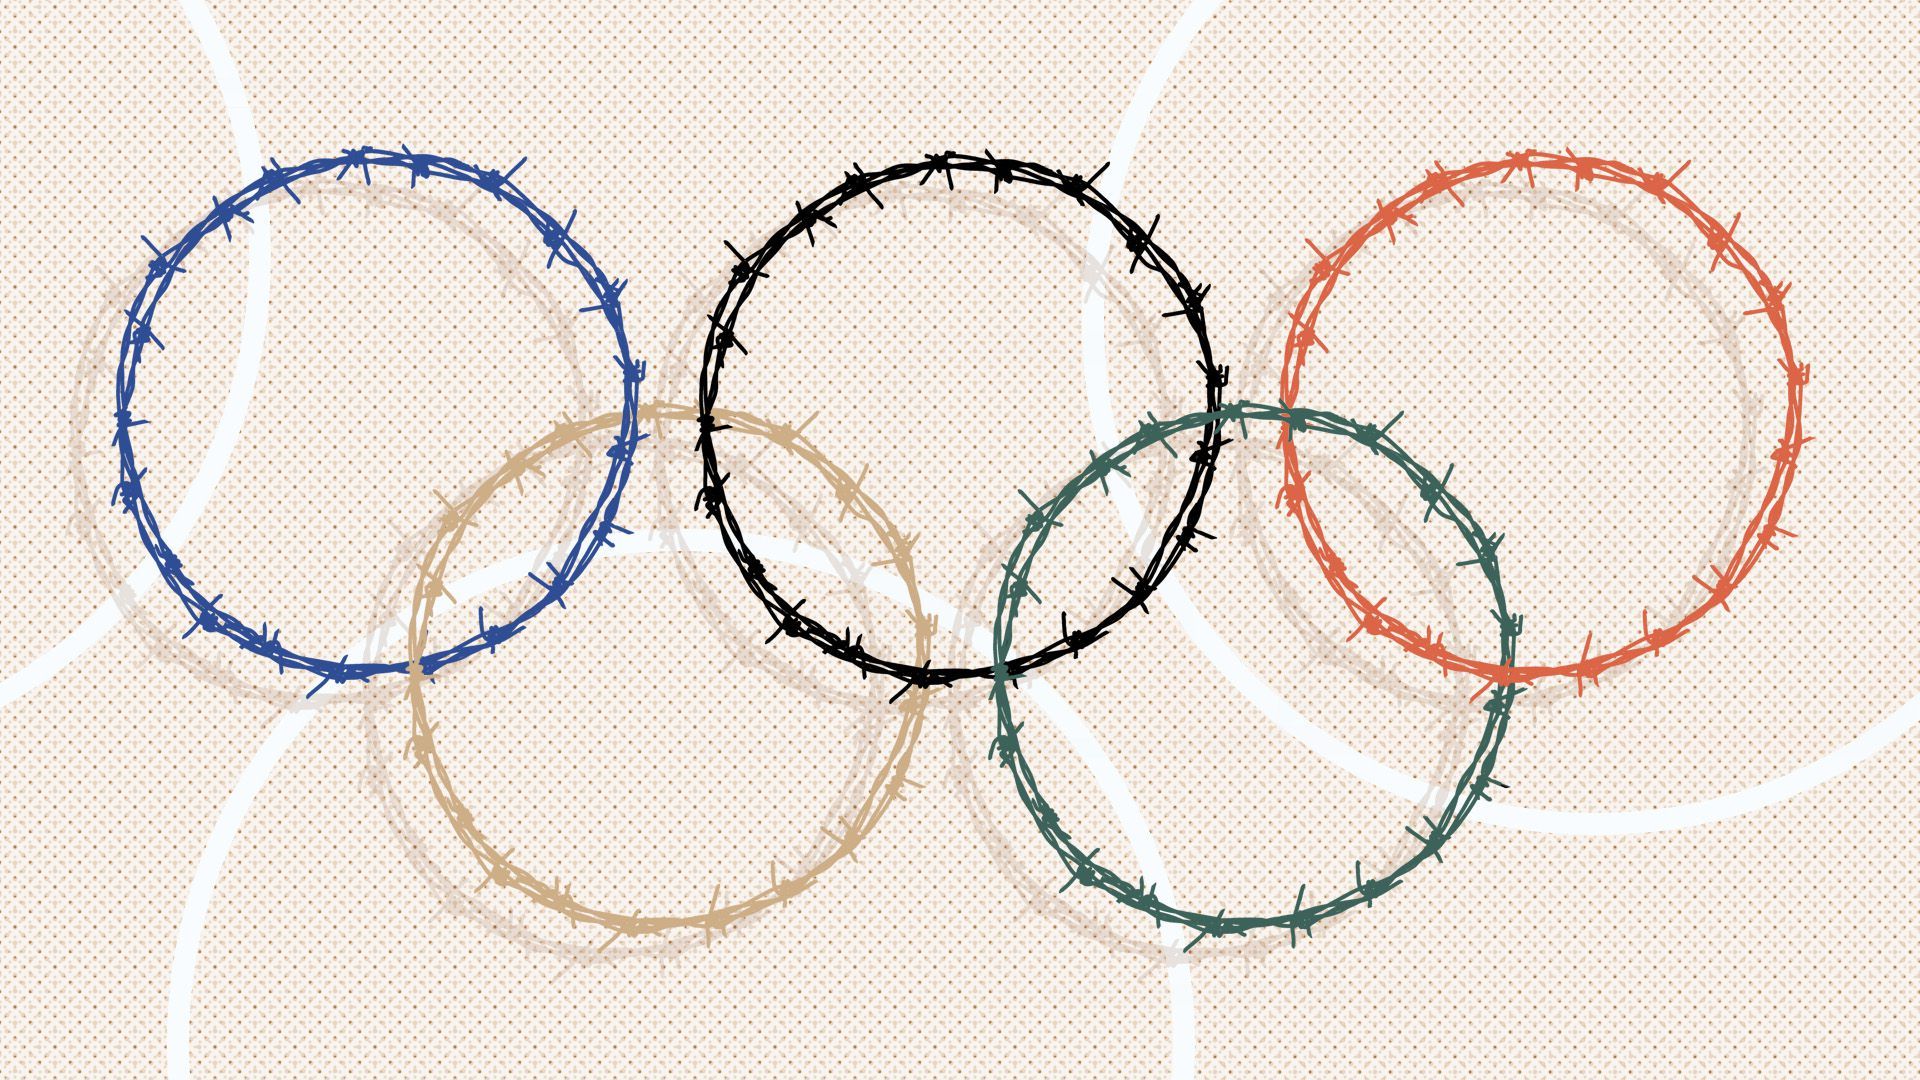 Illustration of barbed wire in the shape of the IOC logo